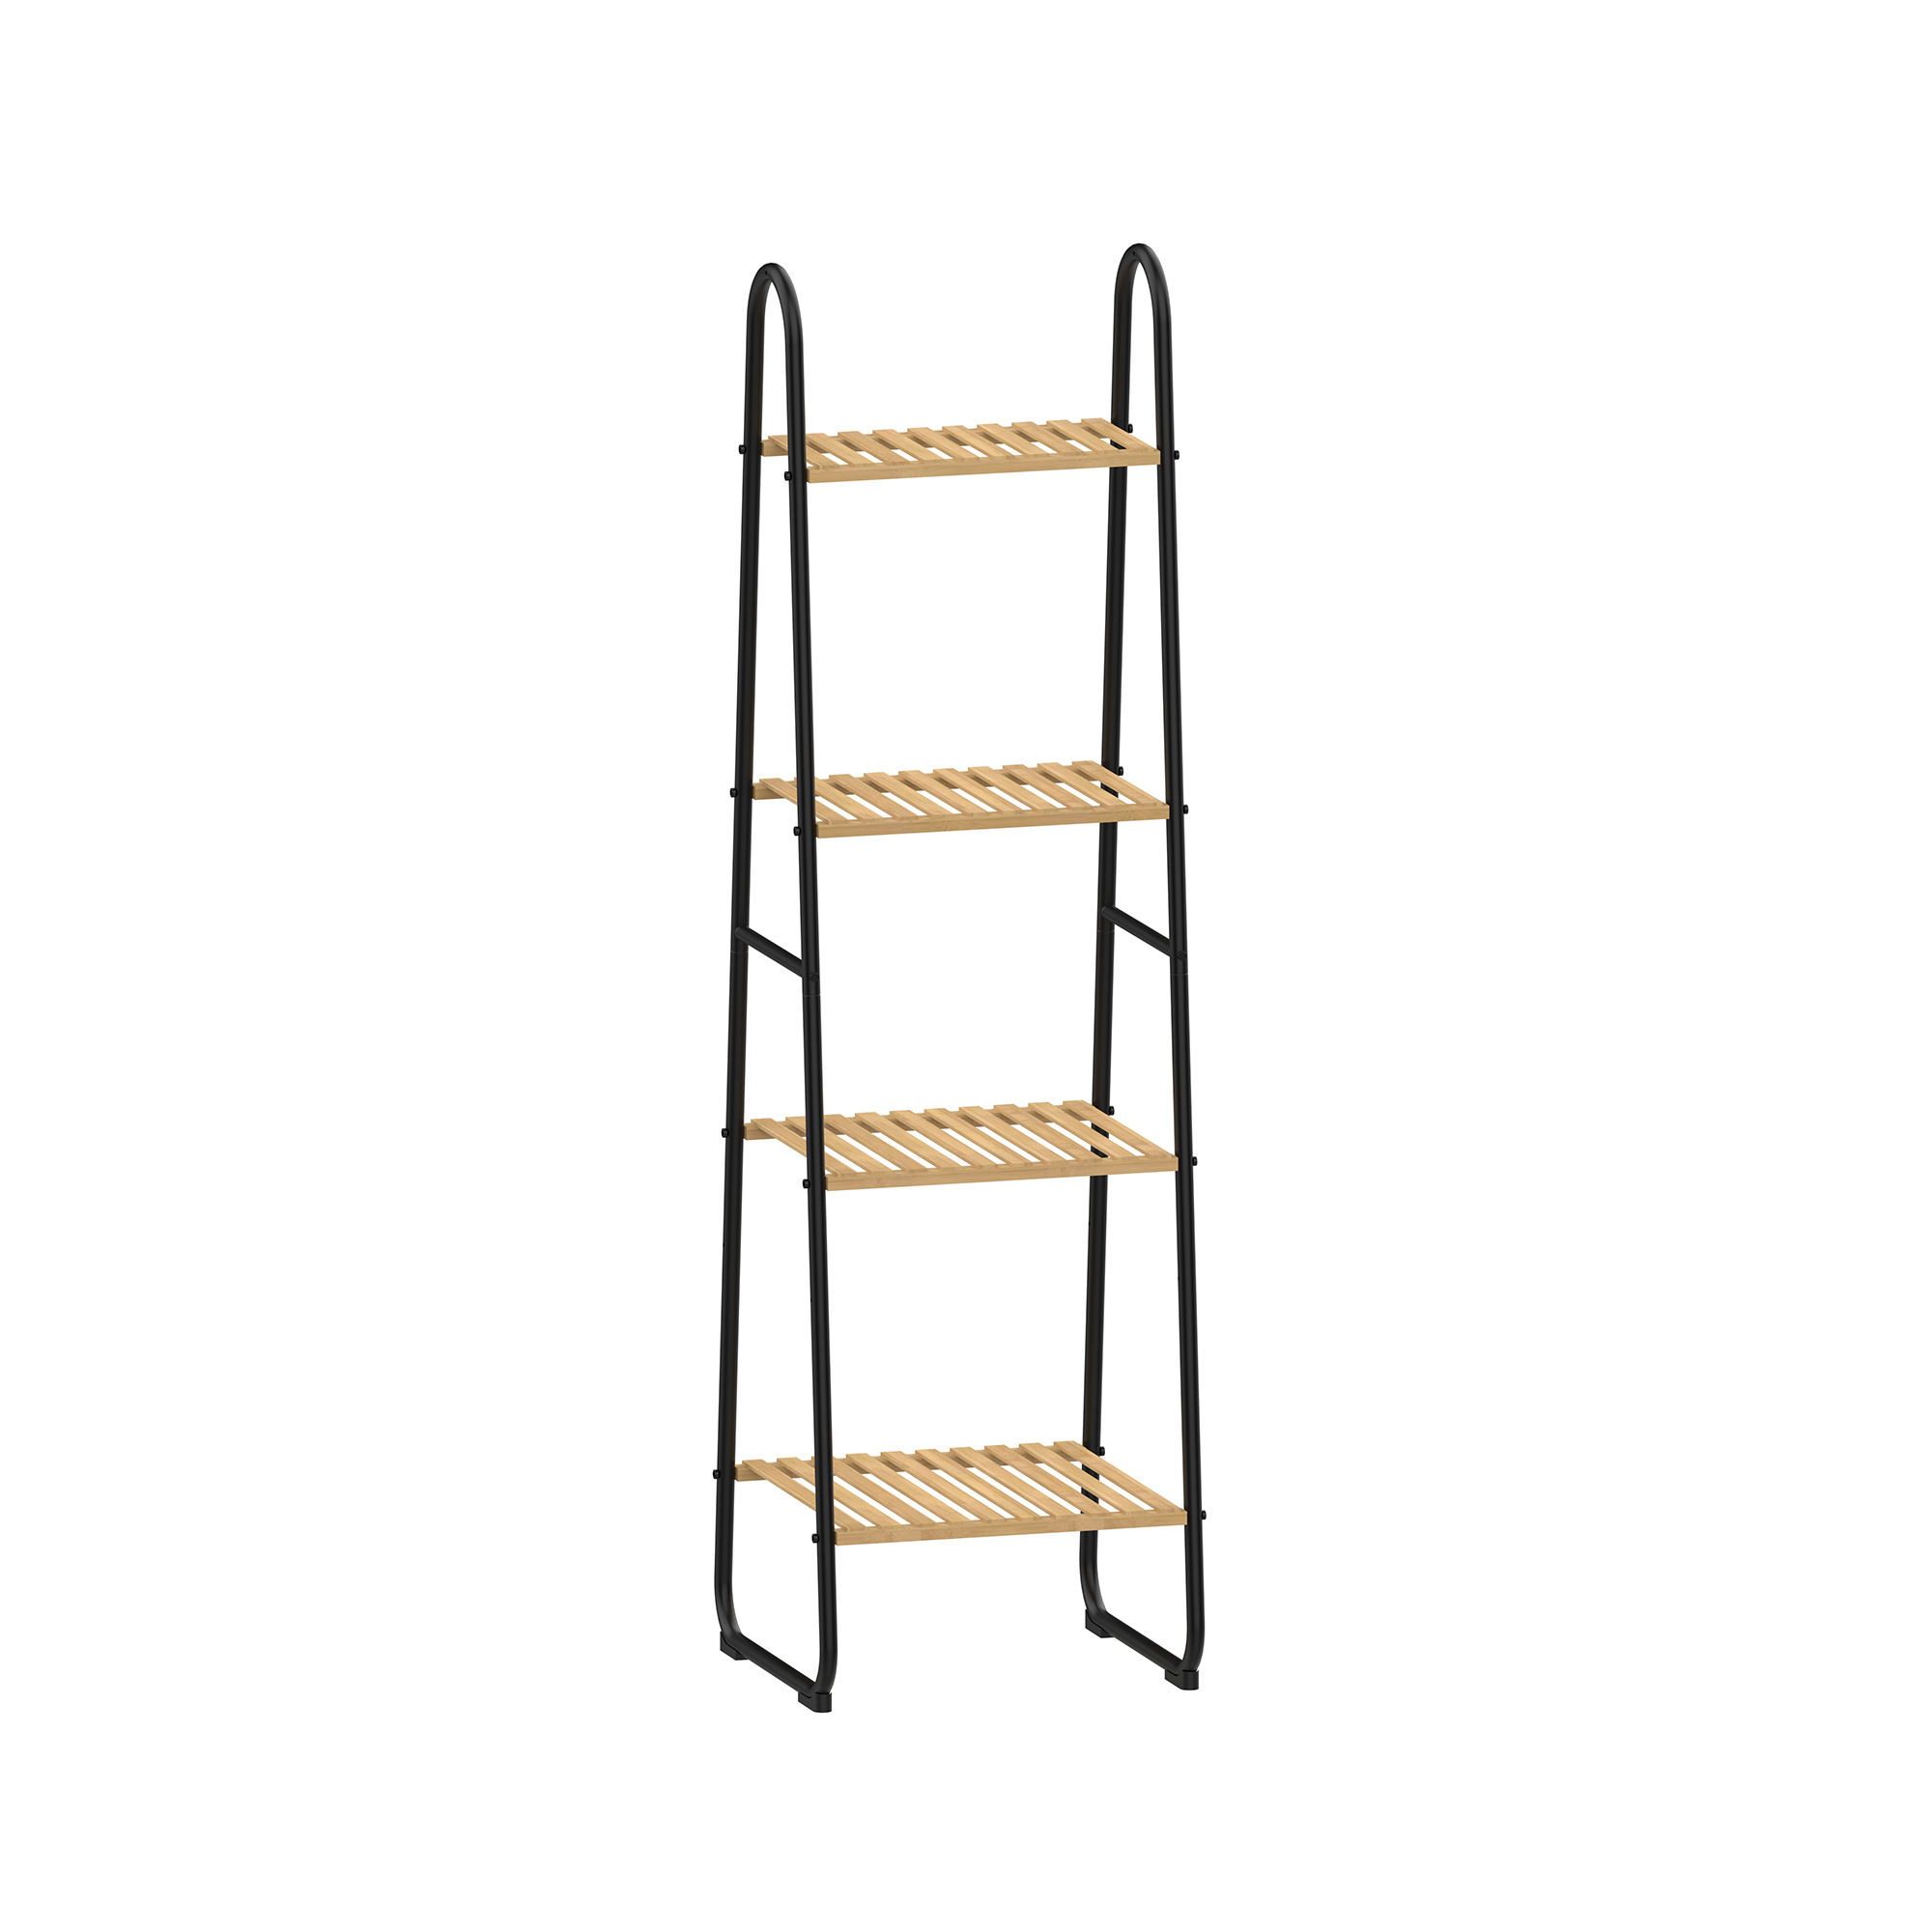 4-Tier Storage Rack with Bamboo Shelves